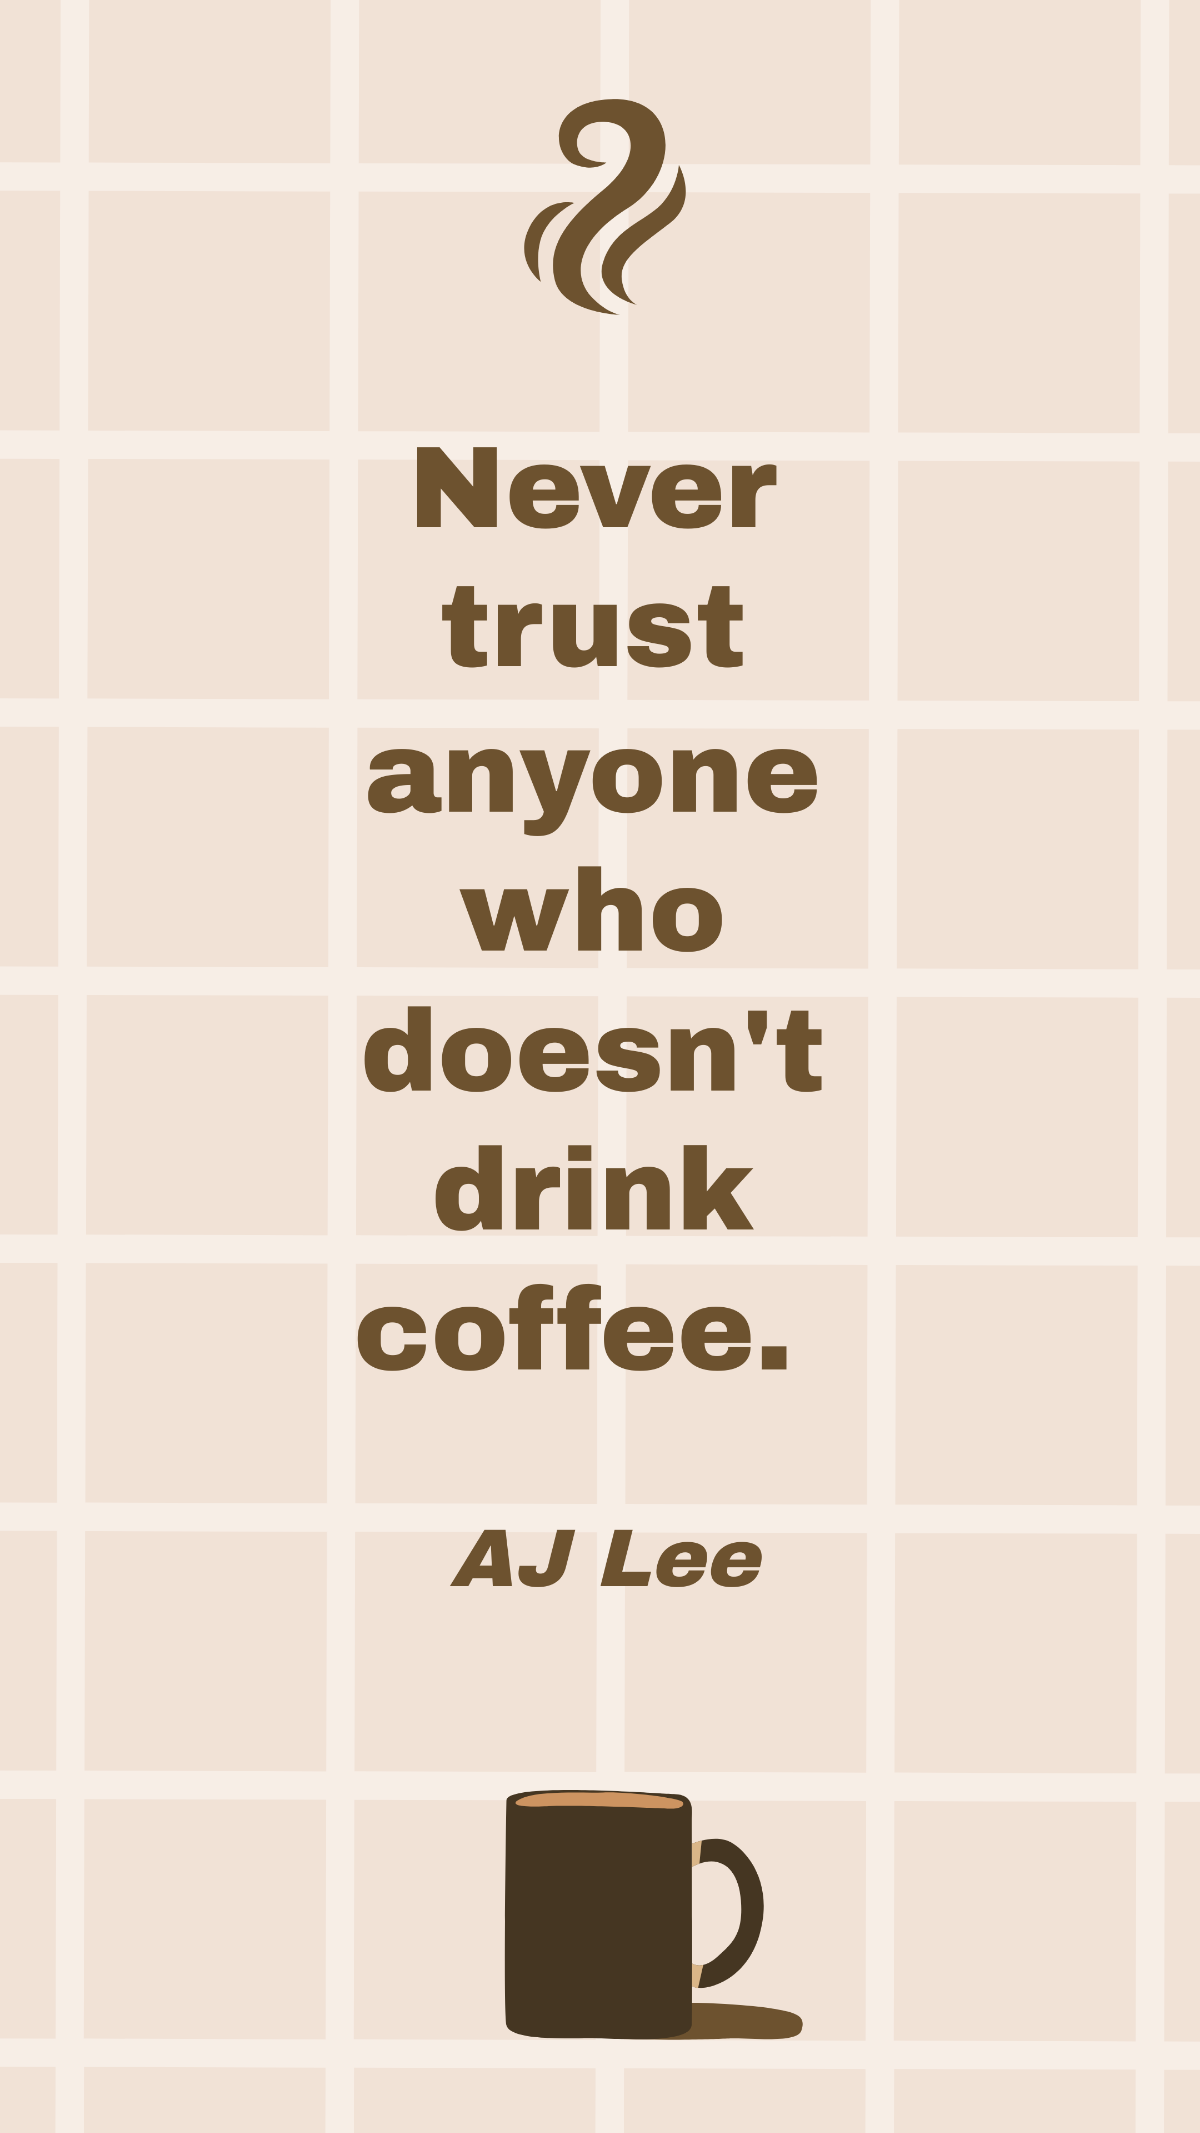 AJ Lee - Never trust anyone who doesn't drink coffee. Template